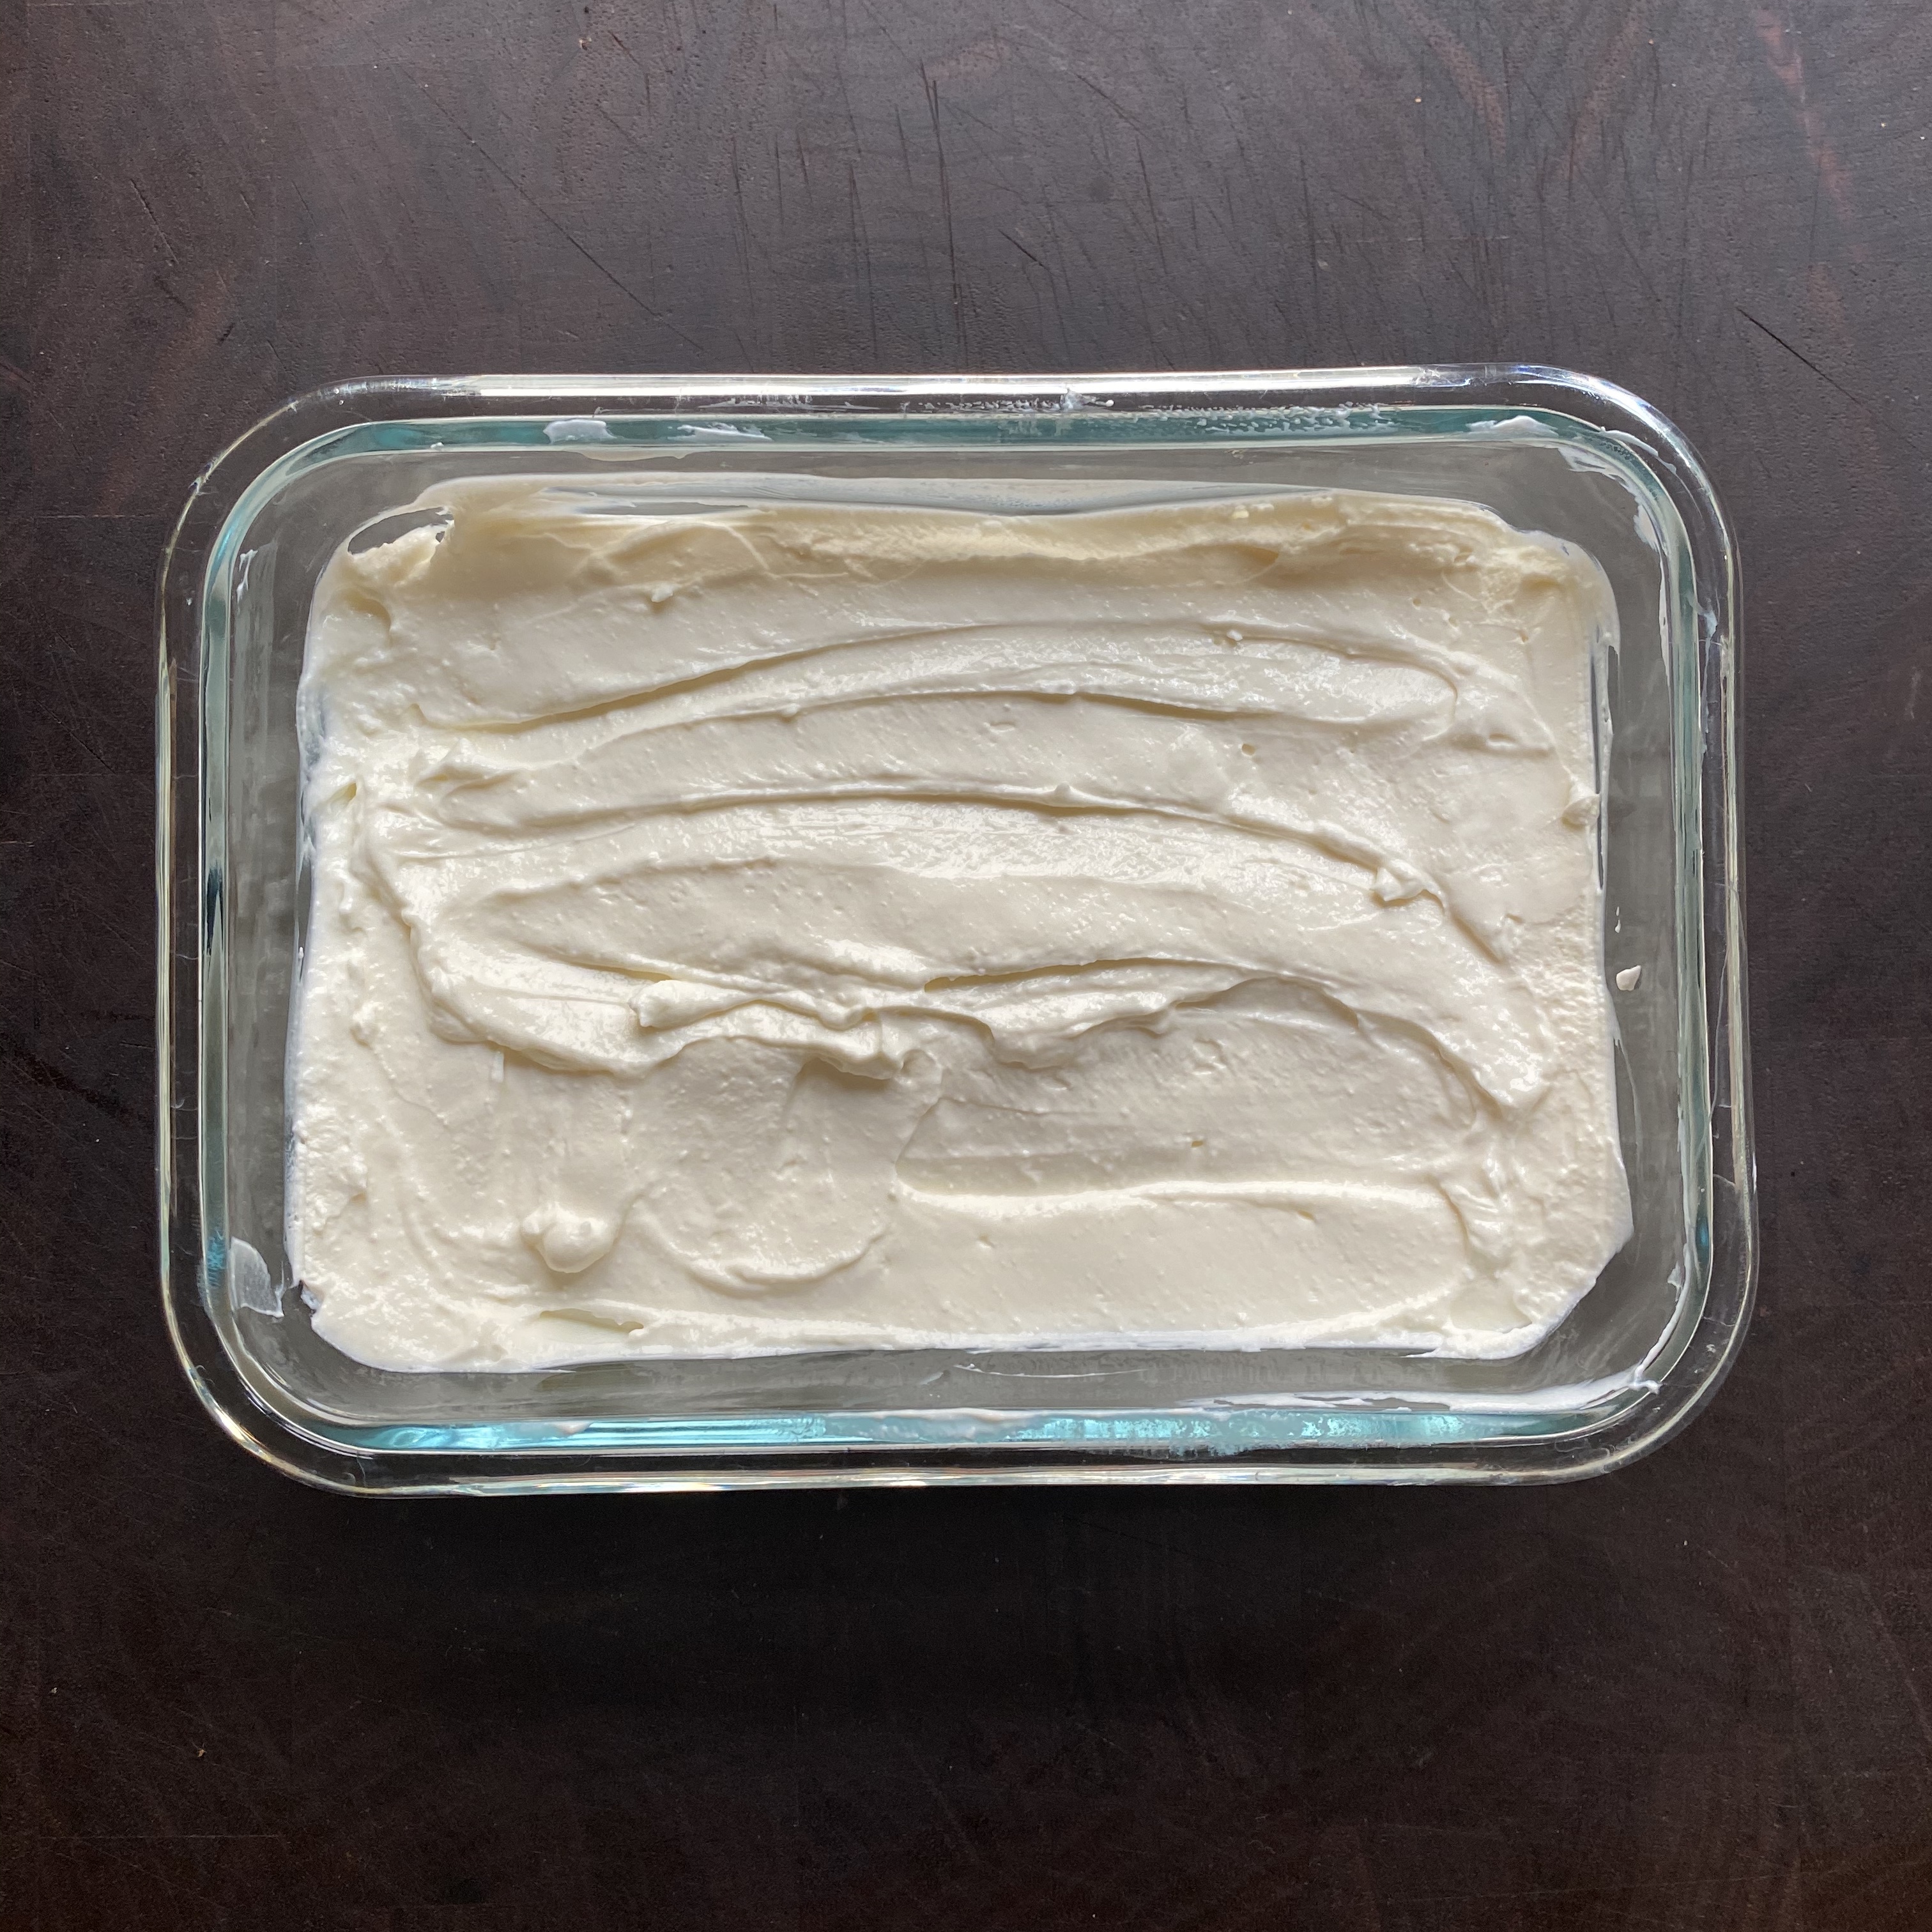 Kefir Cream Cheese (And Whey for Culturing)